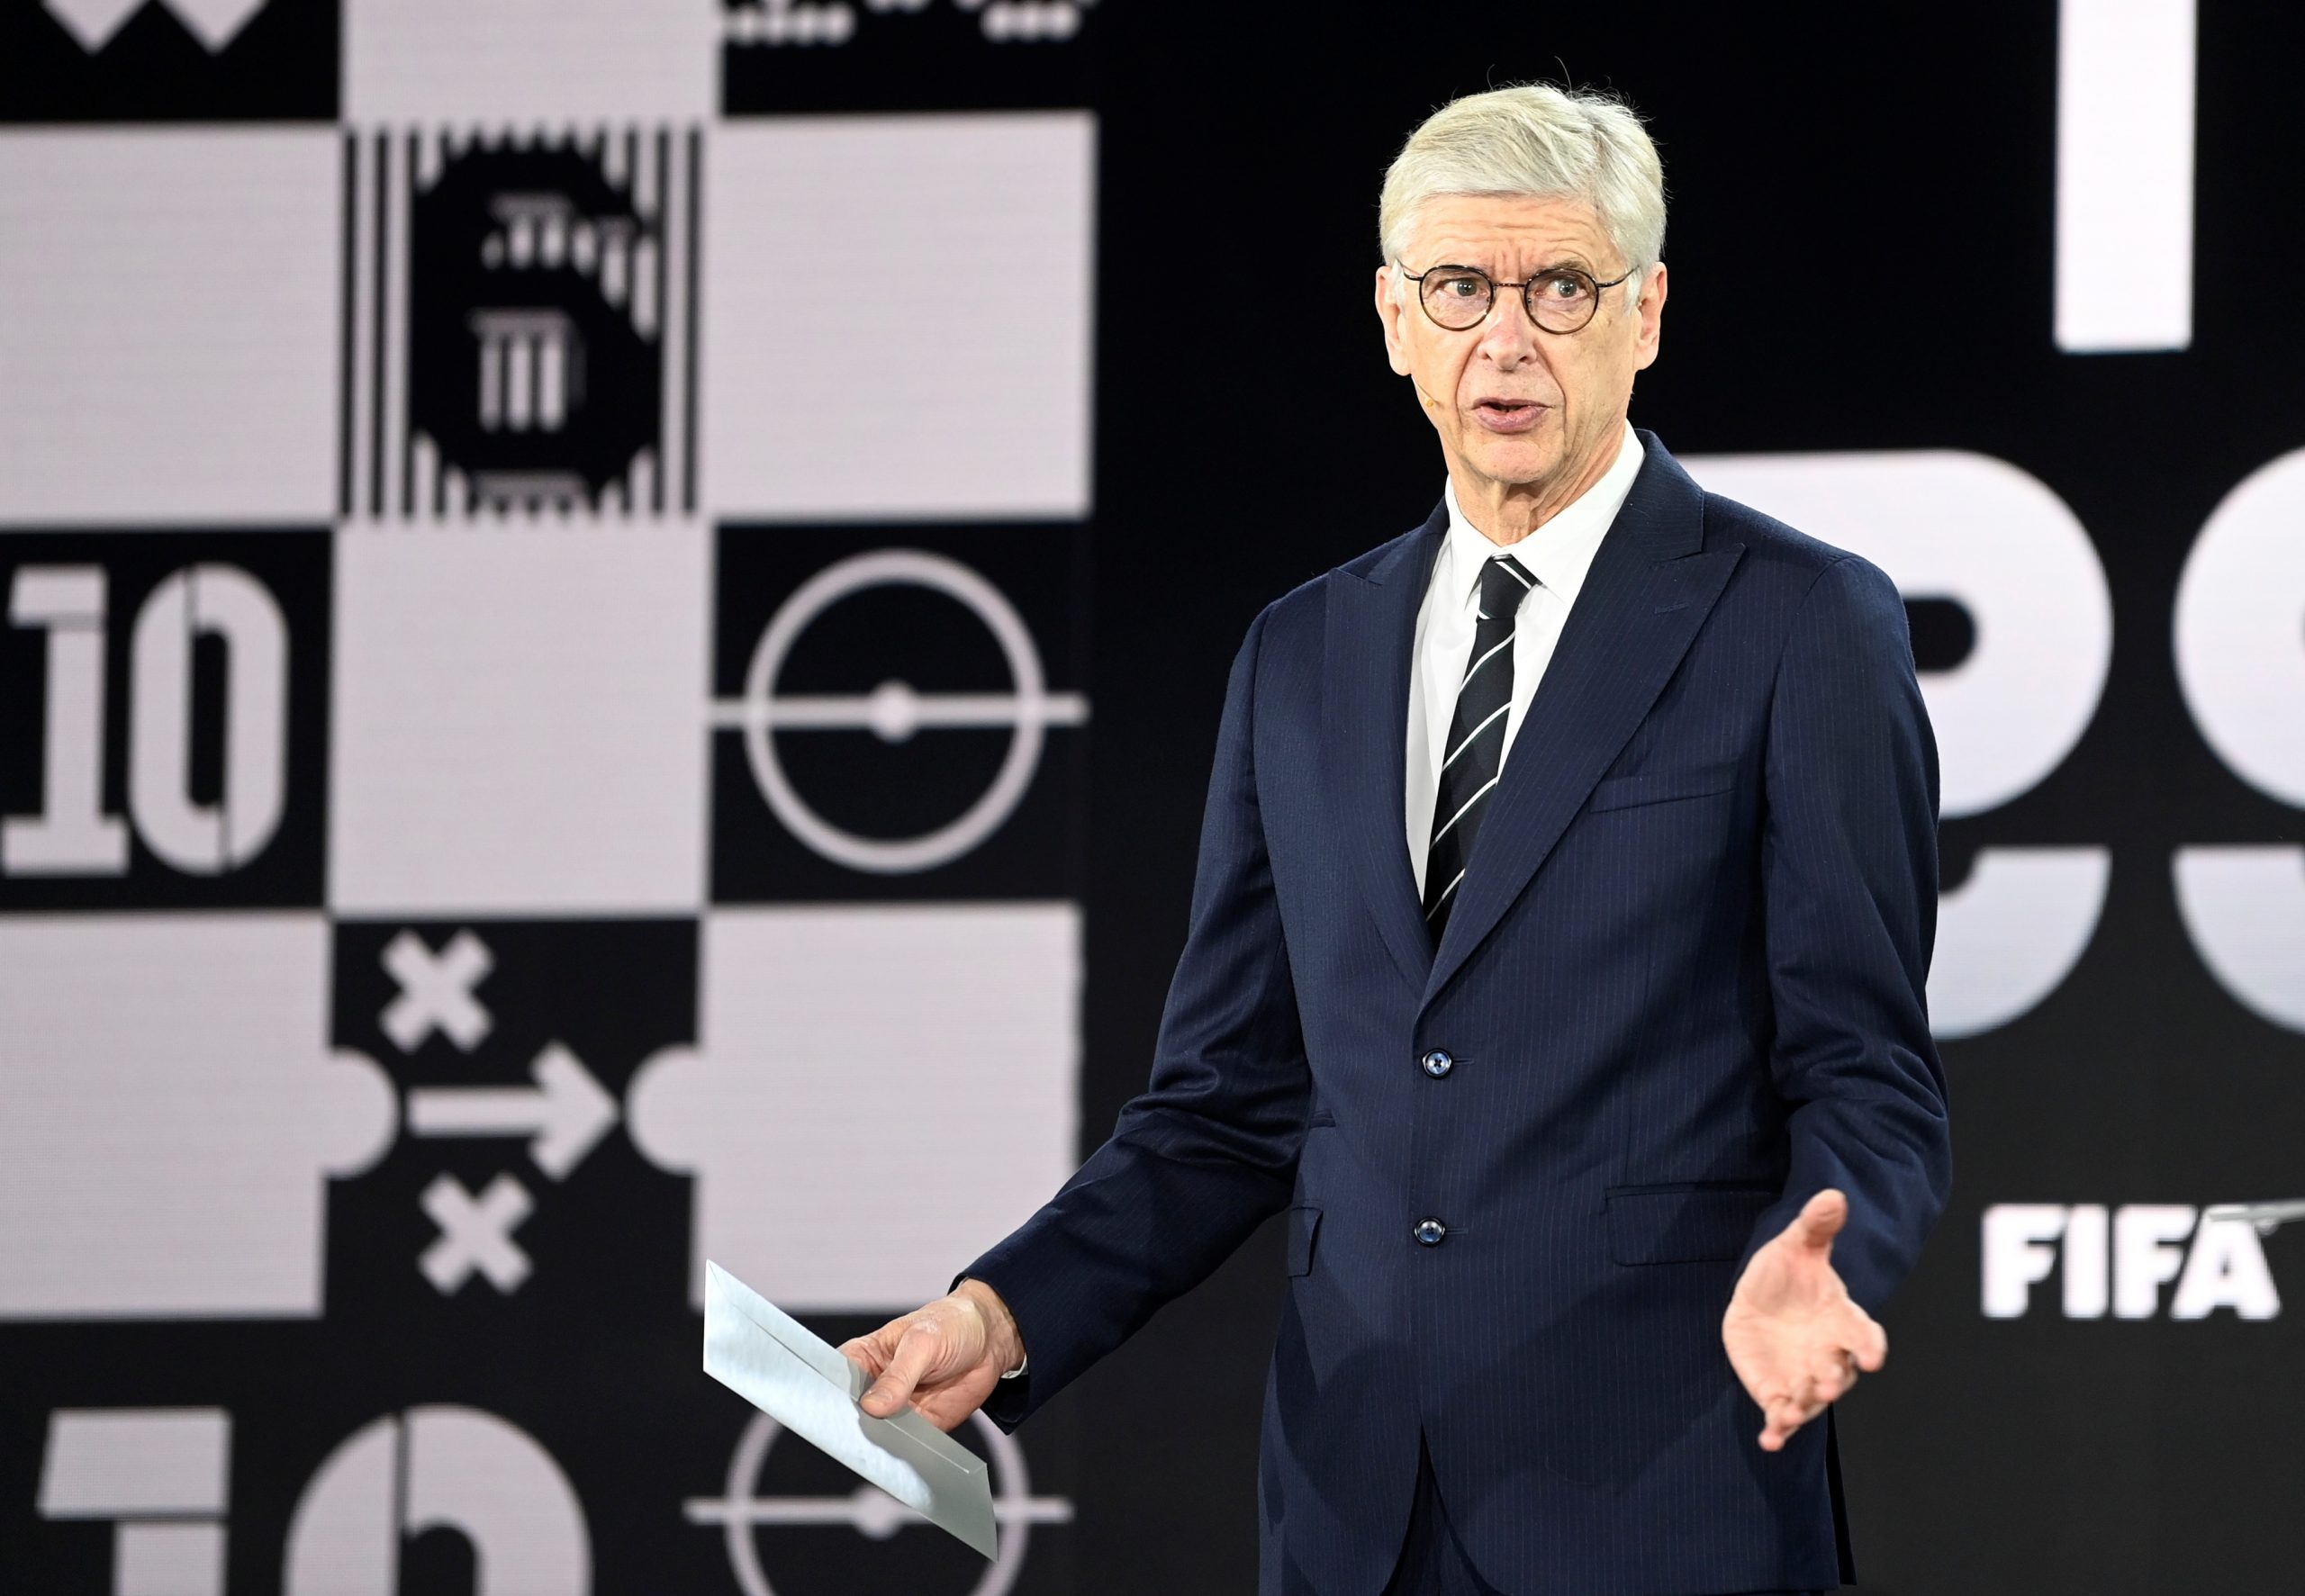 FILE PHOTO: The Best FIFA Football Awards FILE PHOTO: Soccer Football - The Best FIFA Football Awards - Zurich, Switzerland - December 17, 2020 Arsene Wenger during the awards Pool via REUTERS/Valeriano Di Domenico/File Photo VALERIANO DI DOMENICO